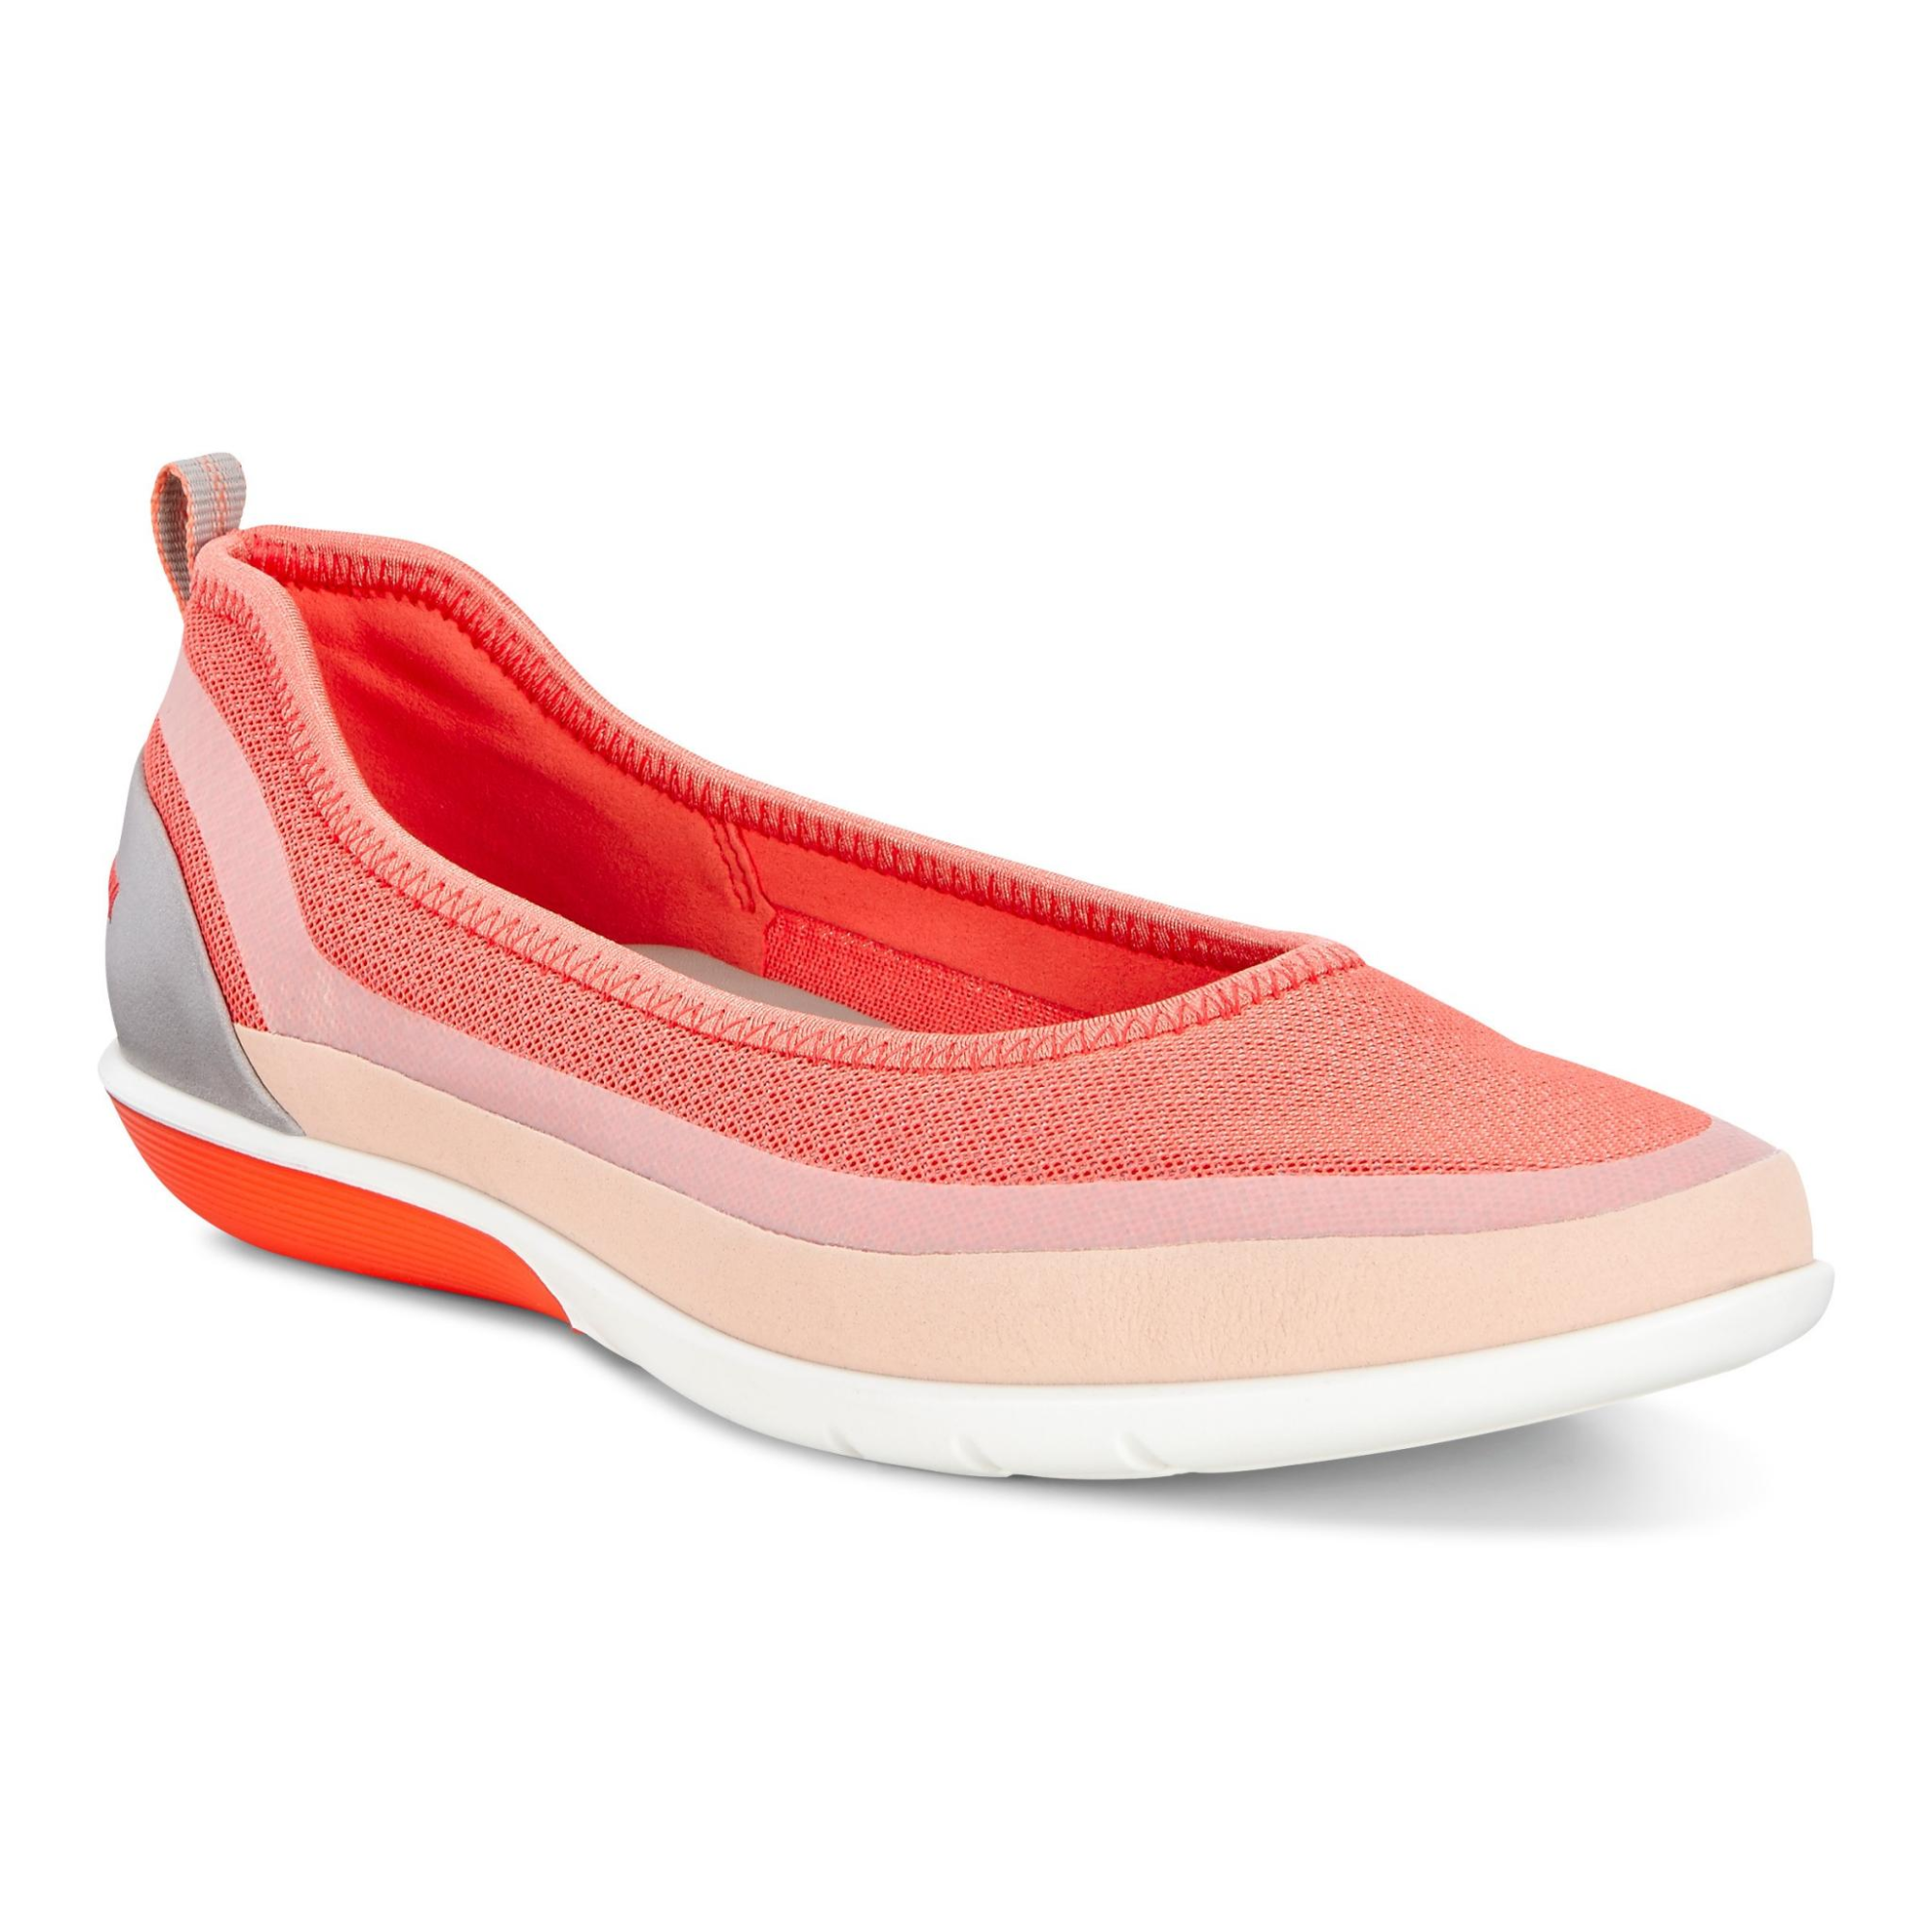 Ecco Sense Light Ballerina 40 - Products Veryk Mall - Veryk Mall, many quick safe your